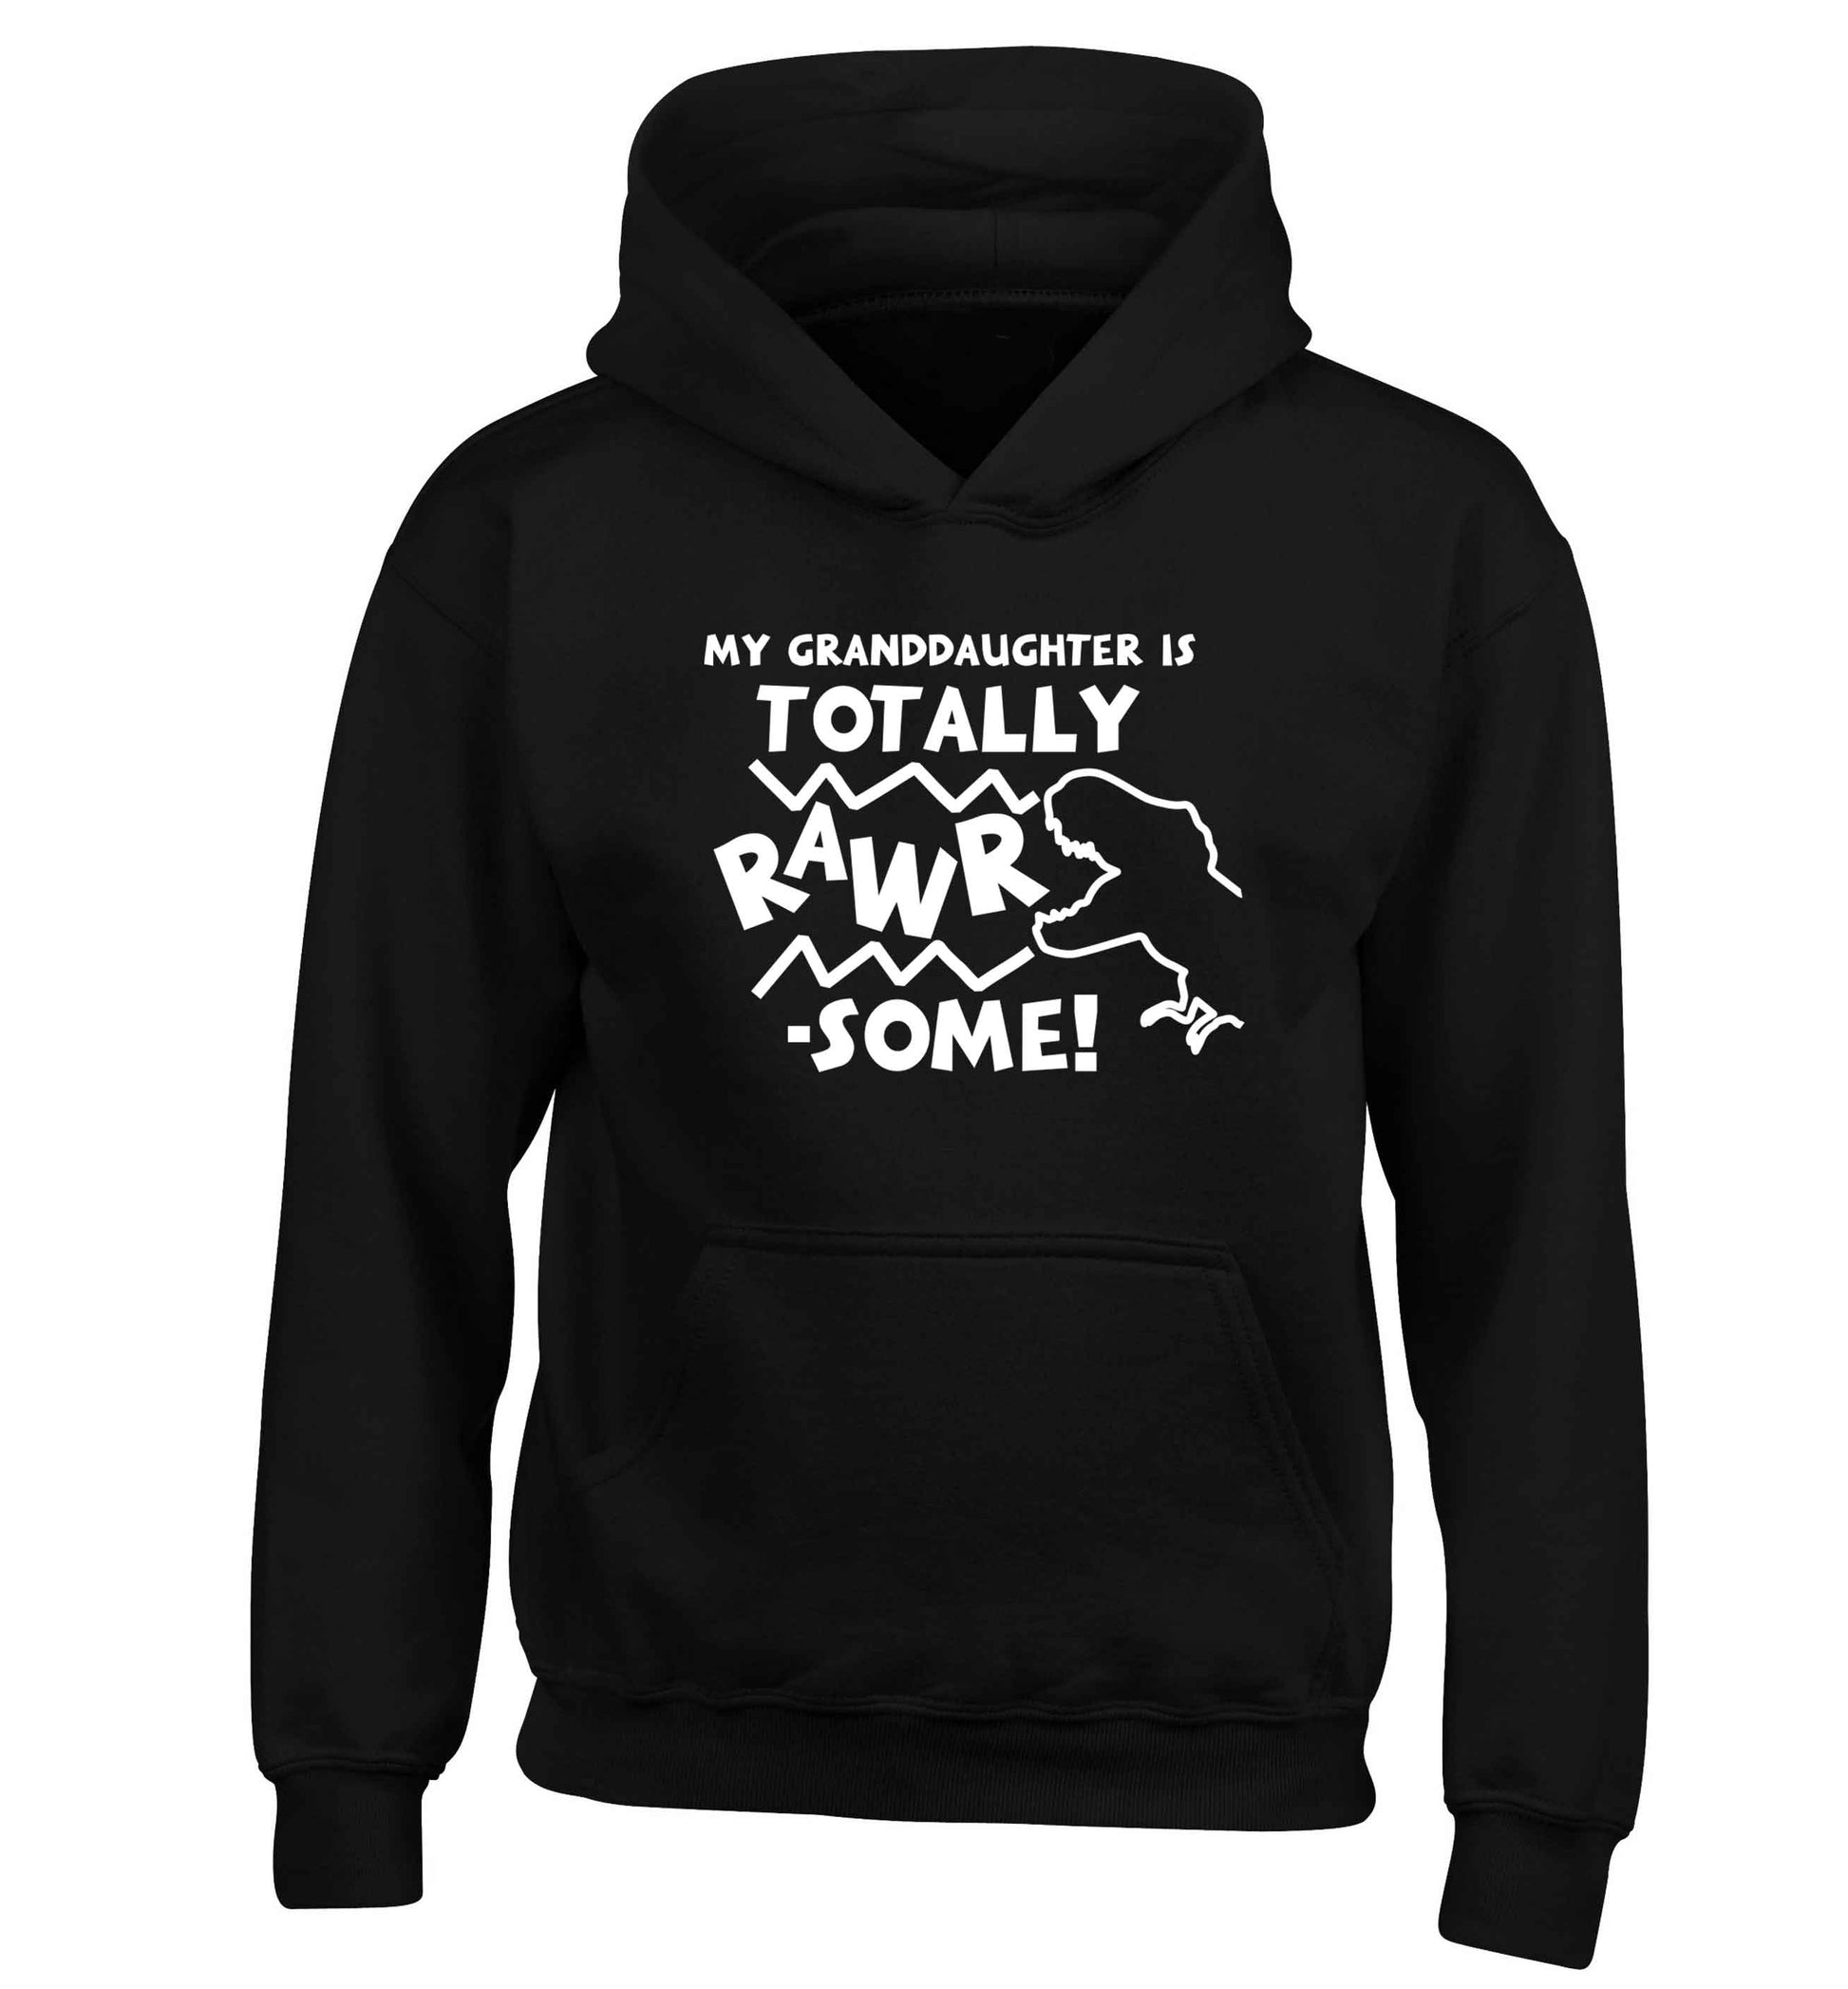 My granddaughter is totally rawrsome children's black hoodie 12-13 Years